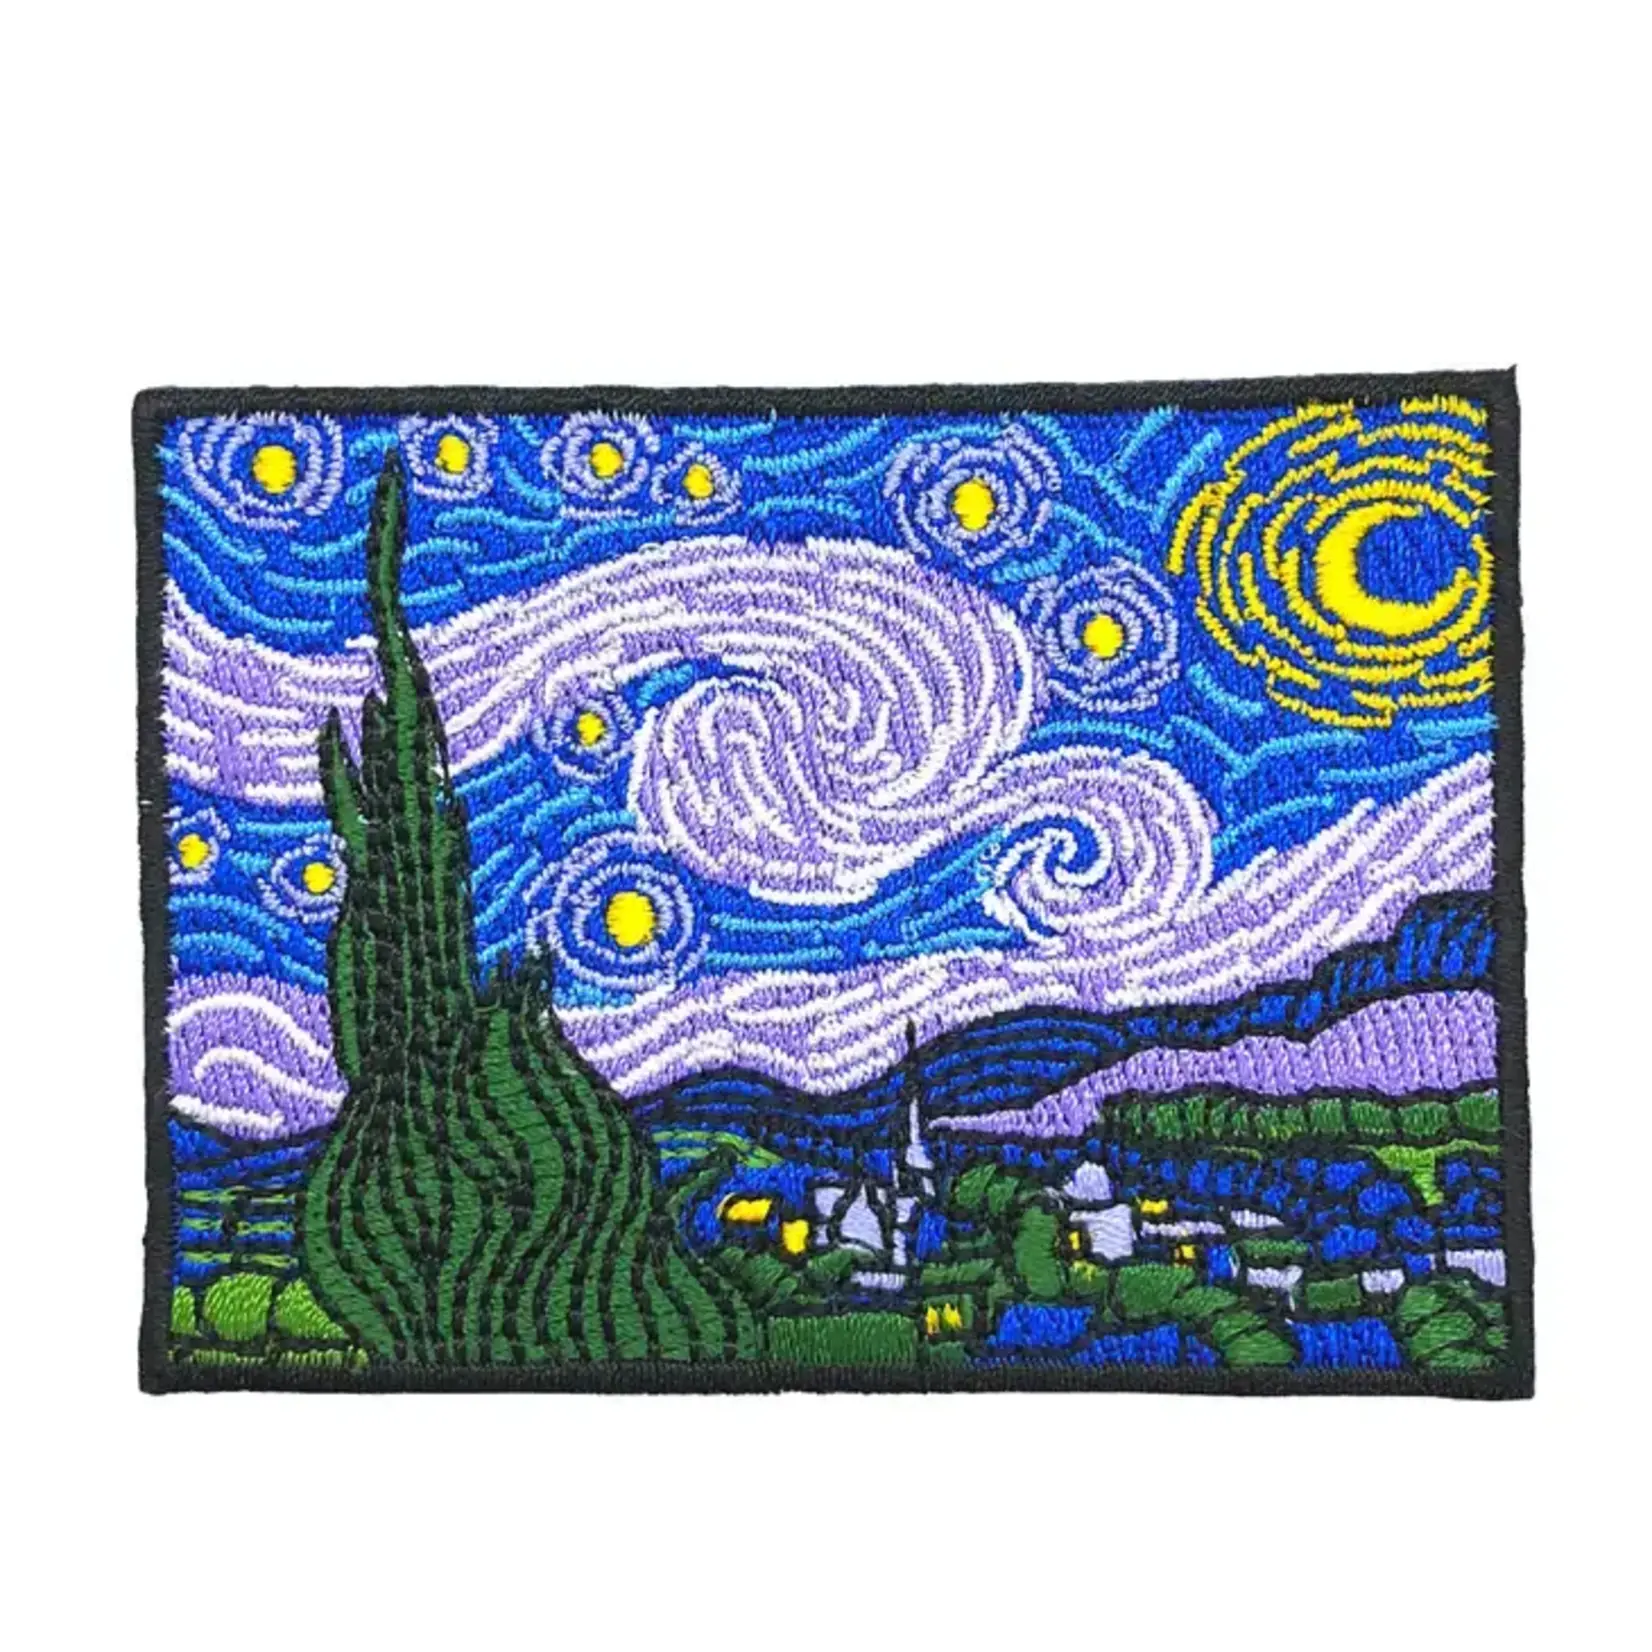 FAIRE (TODAY IS ART DAY) PATCH STARRY NIGHT VAN GOGH